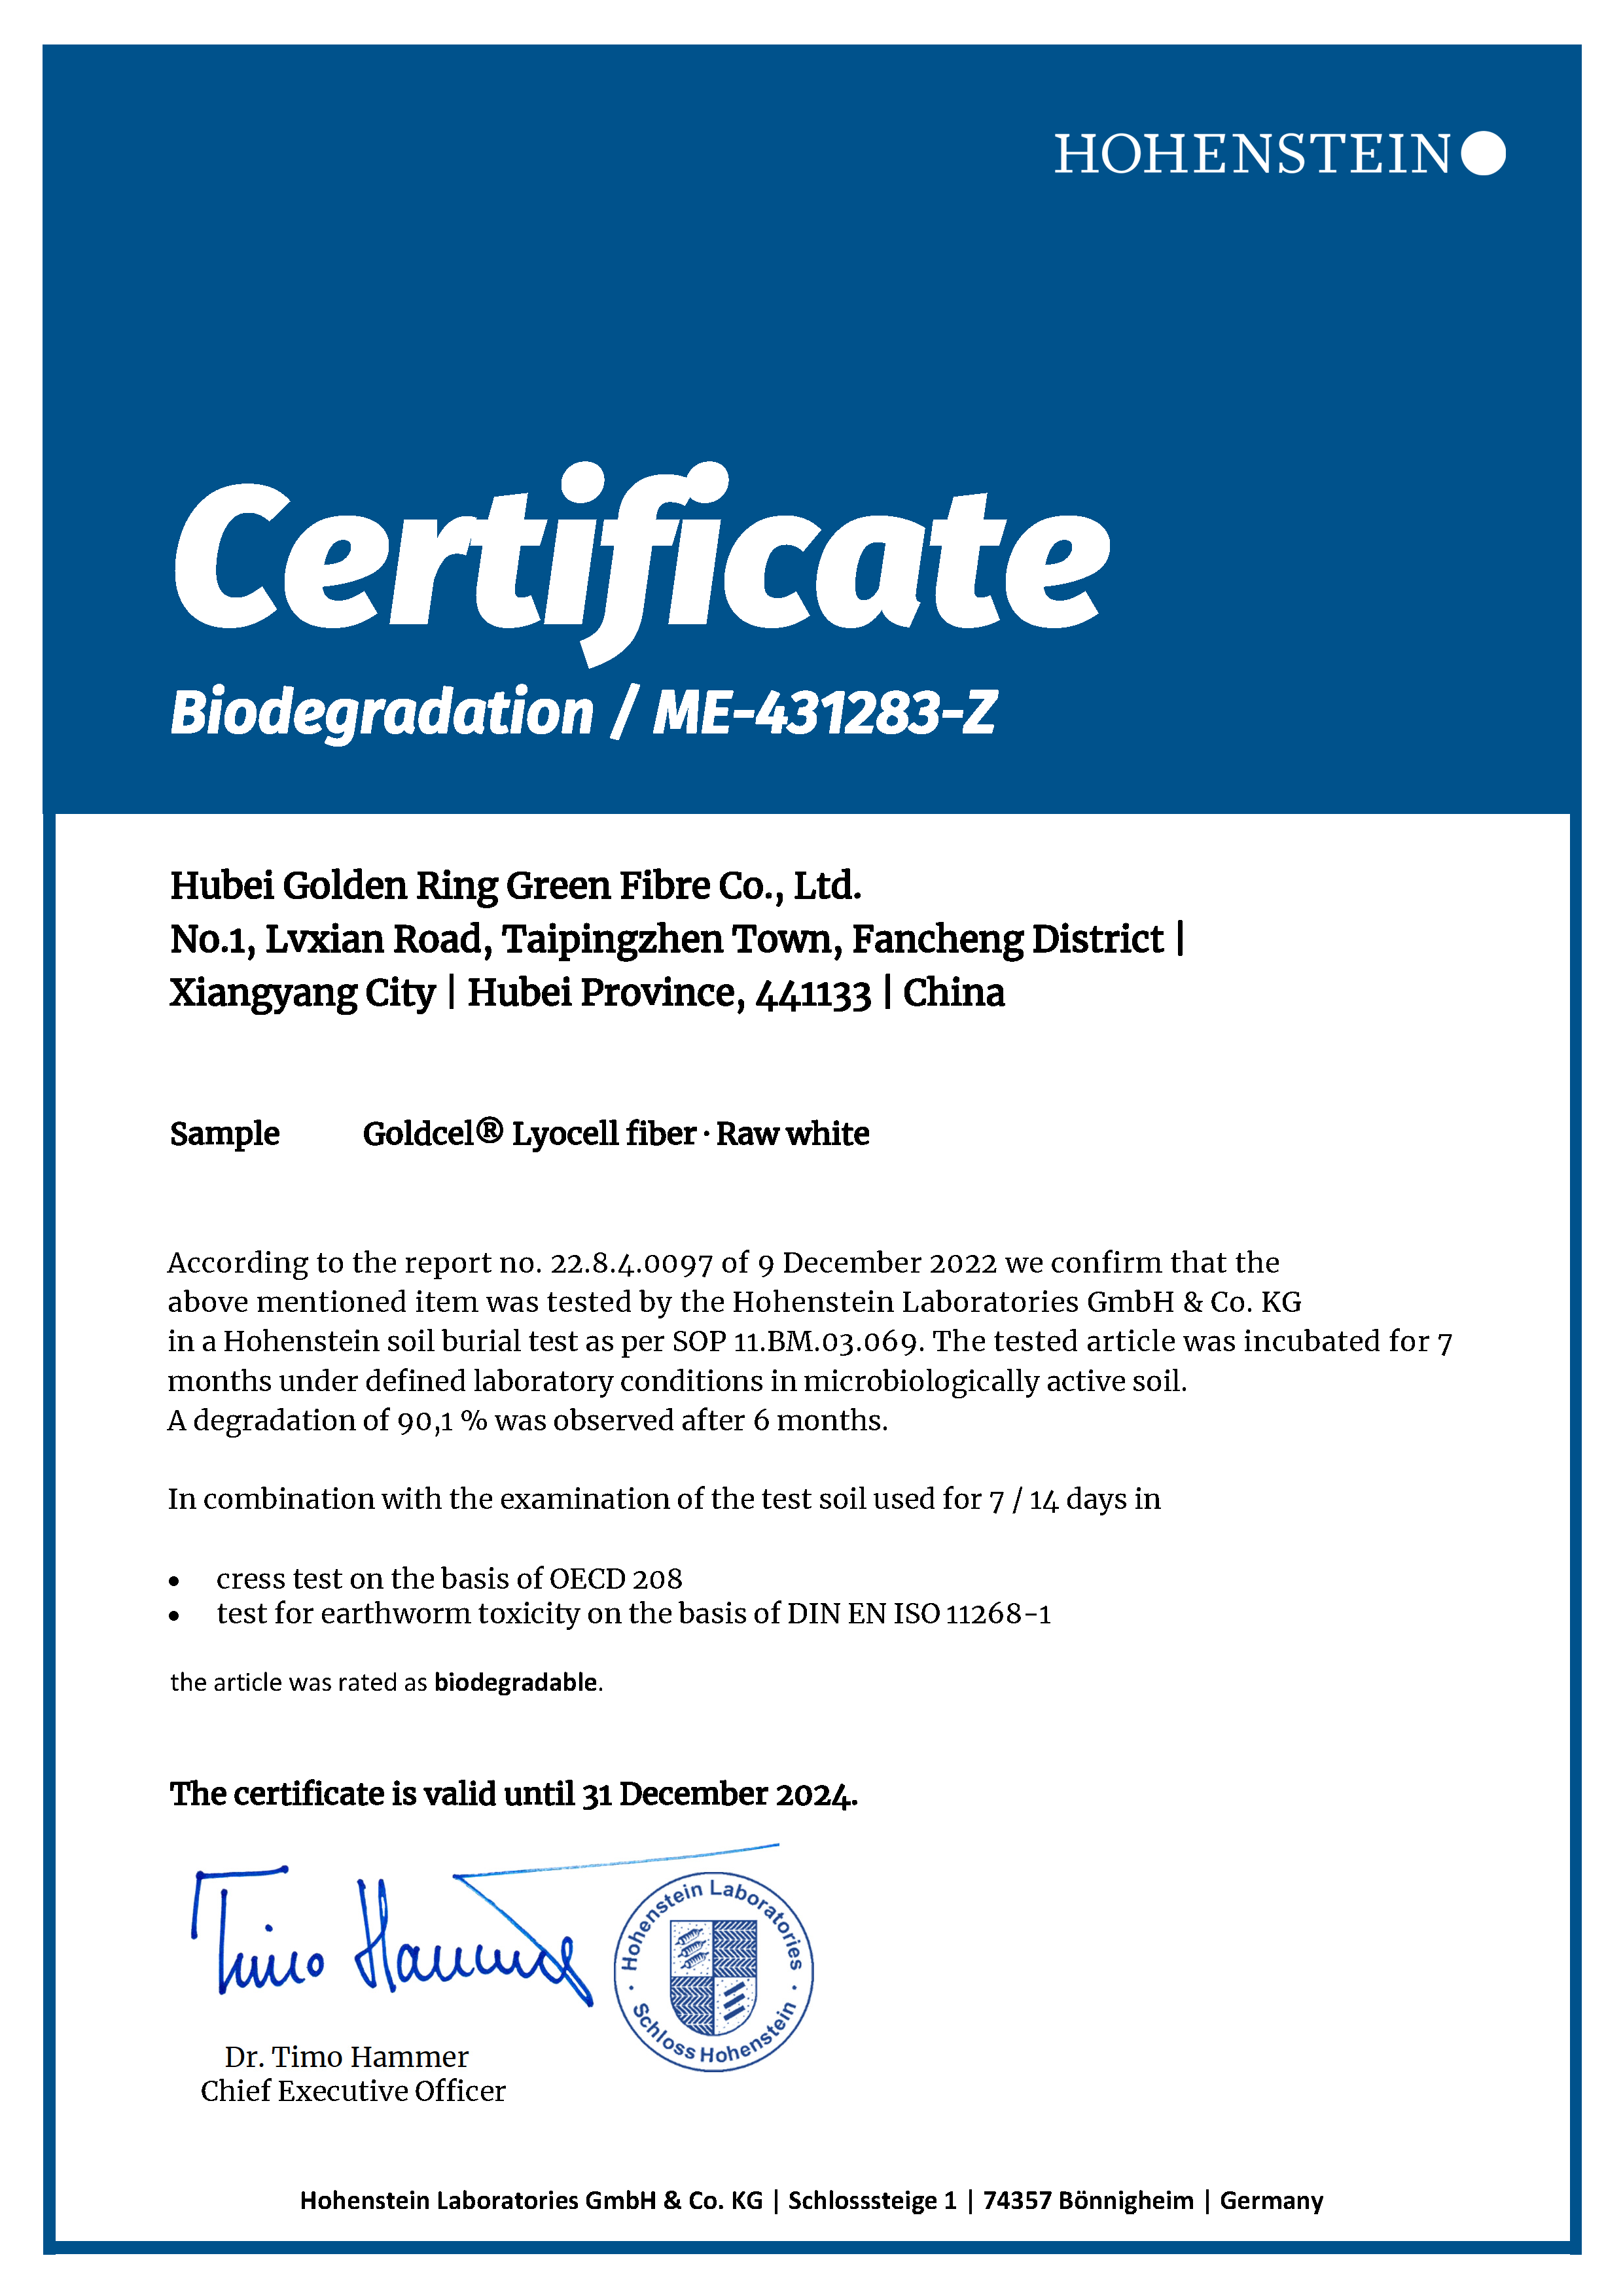 ME-431283-Z_Certificate_Biodegradable_Chinese